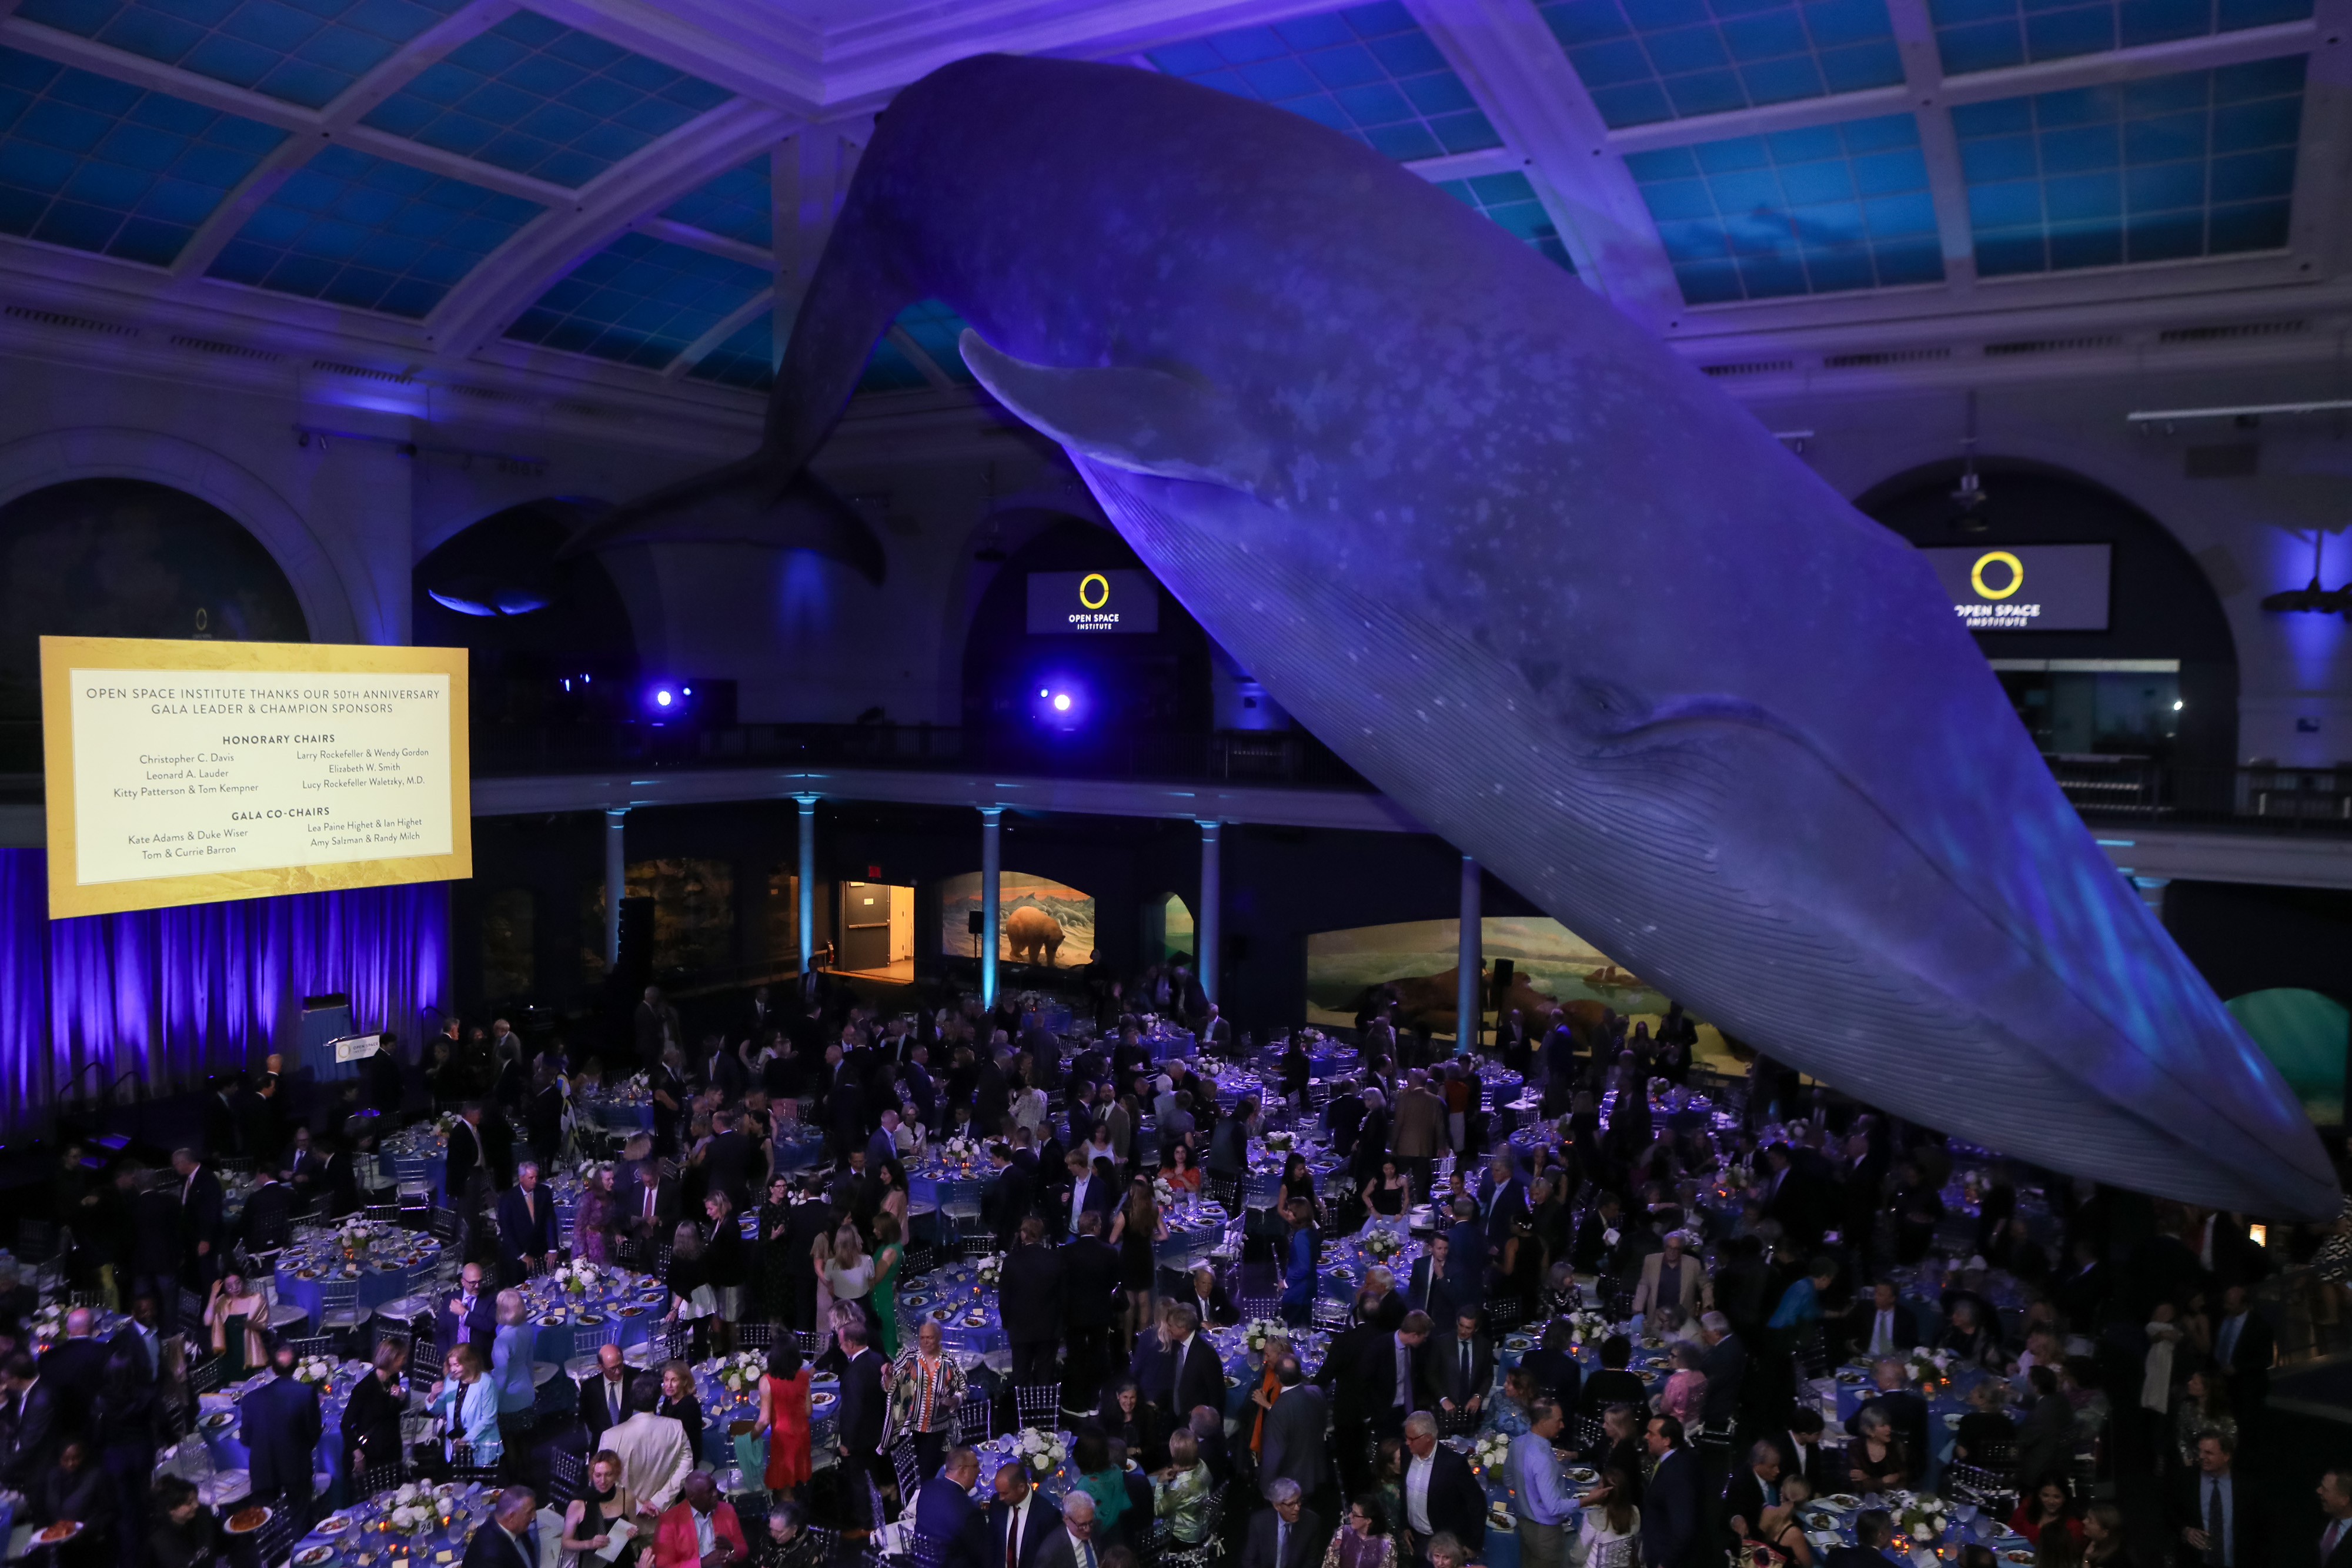 Nearly 550 friends and supporters gathered to celebrate 50 years of OSI's conservation successes. Photo by Udo Salters/Patrick McMullan, courtesy of the Open Space Institute